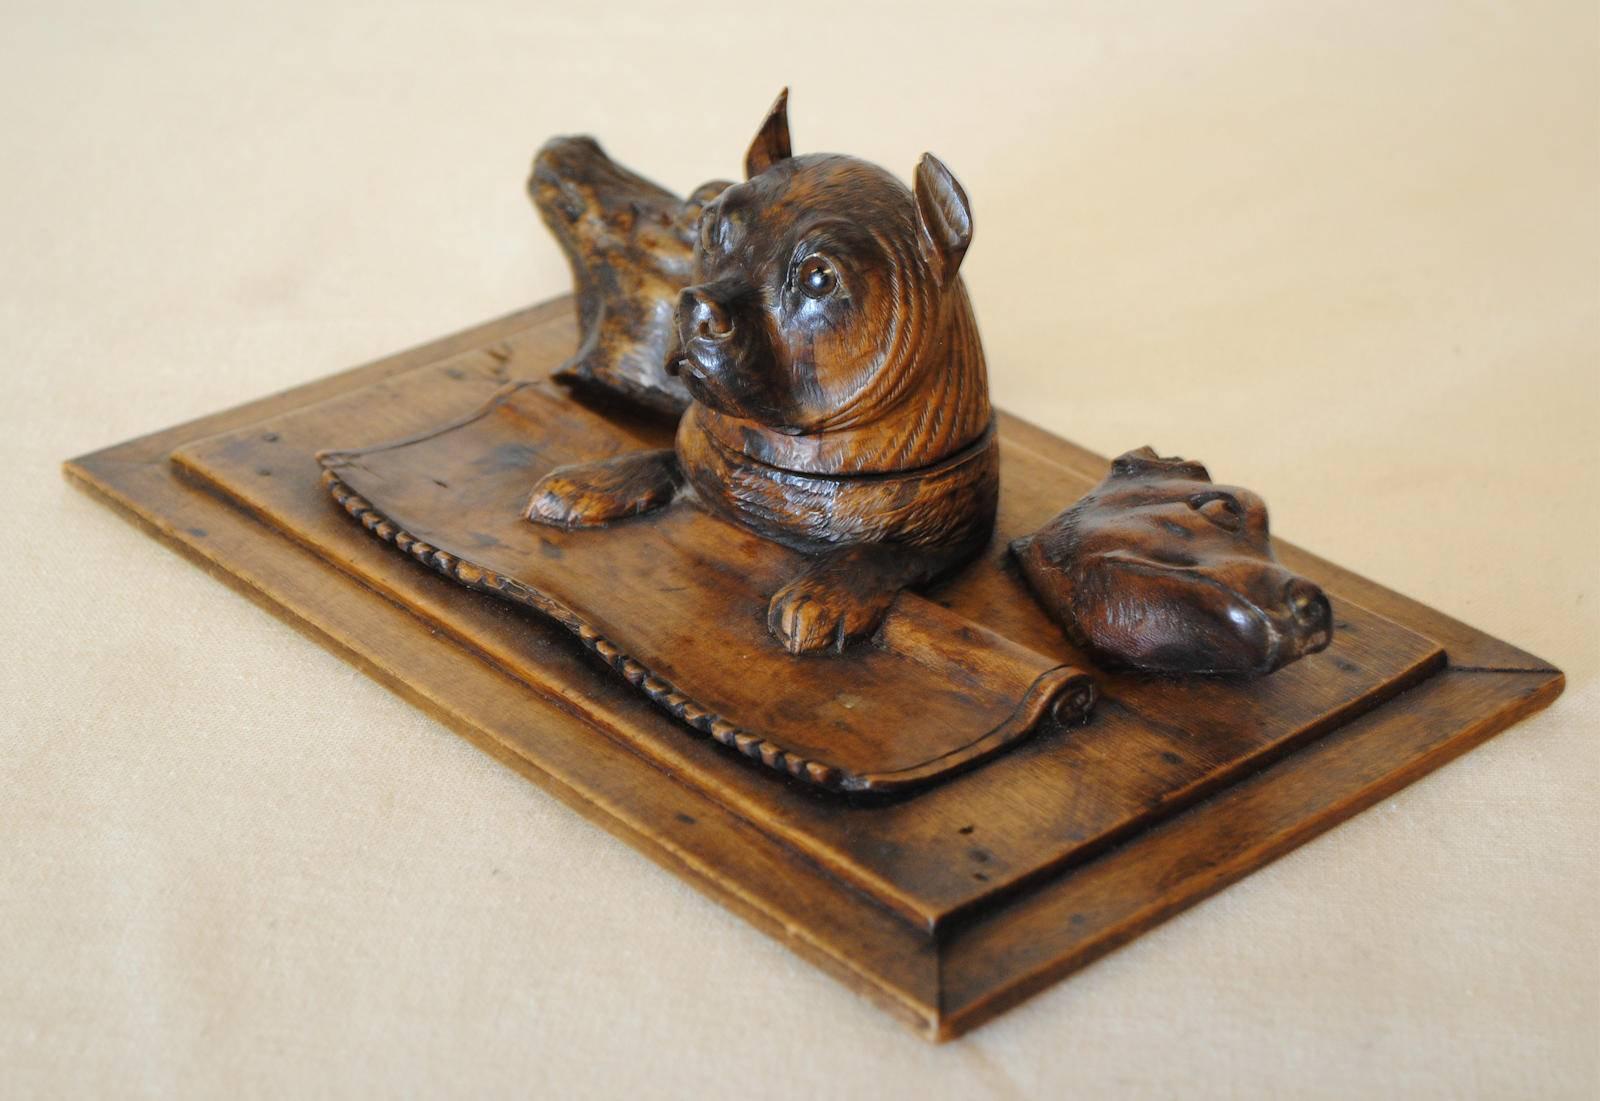 Austrian animalia themed inkwell featuring a Pug Dog aside a cow and fox. The Pug's head lifts to reveal an inkwell. A very sweet piece to decorate your desk. Dating as circa 1930.